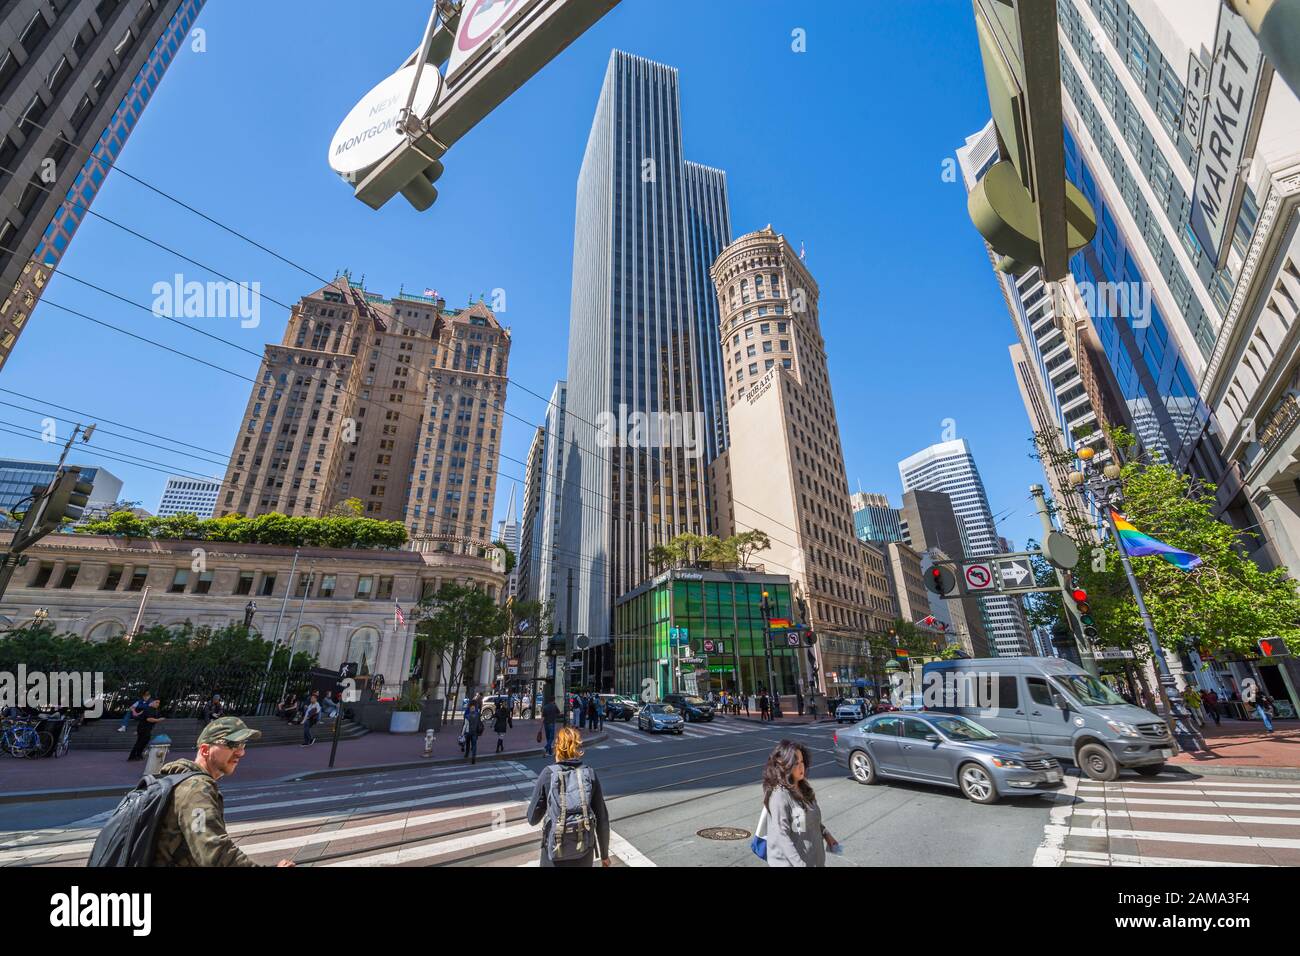 Street scene and tall buildings on Post Street in Downtown, San Francisco, California, USA, North America Stock Photo